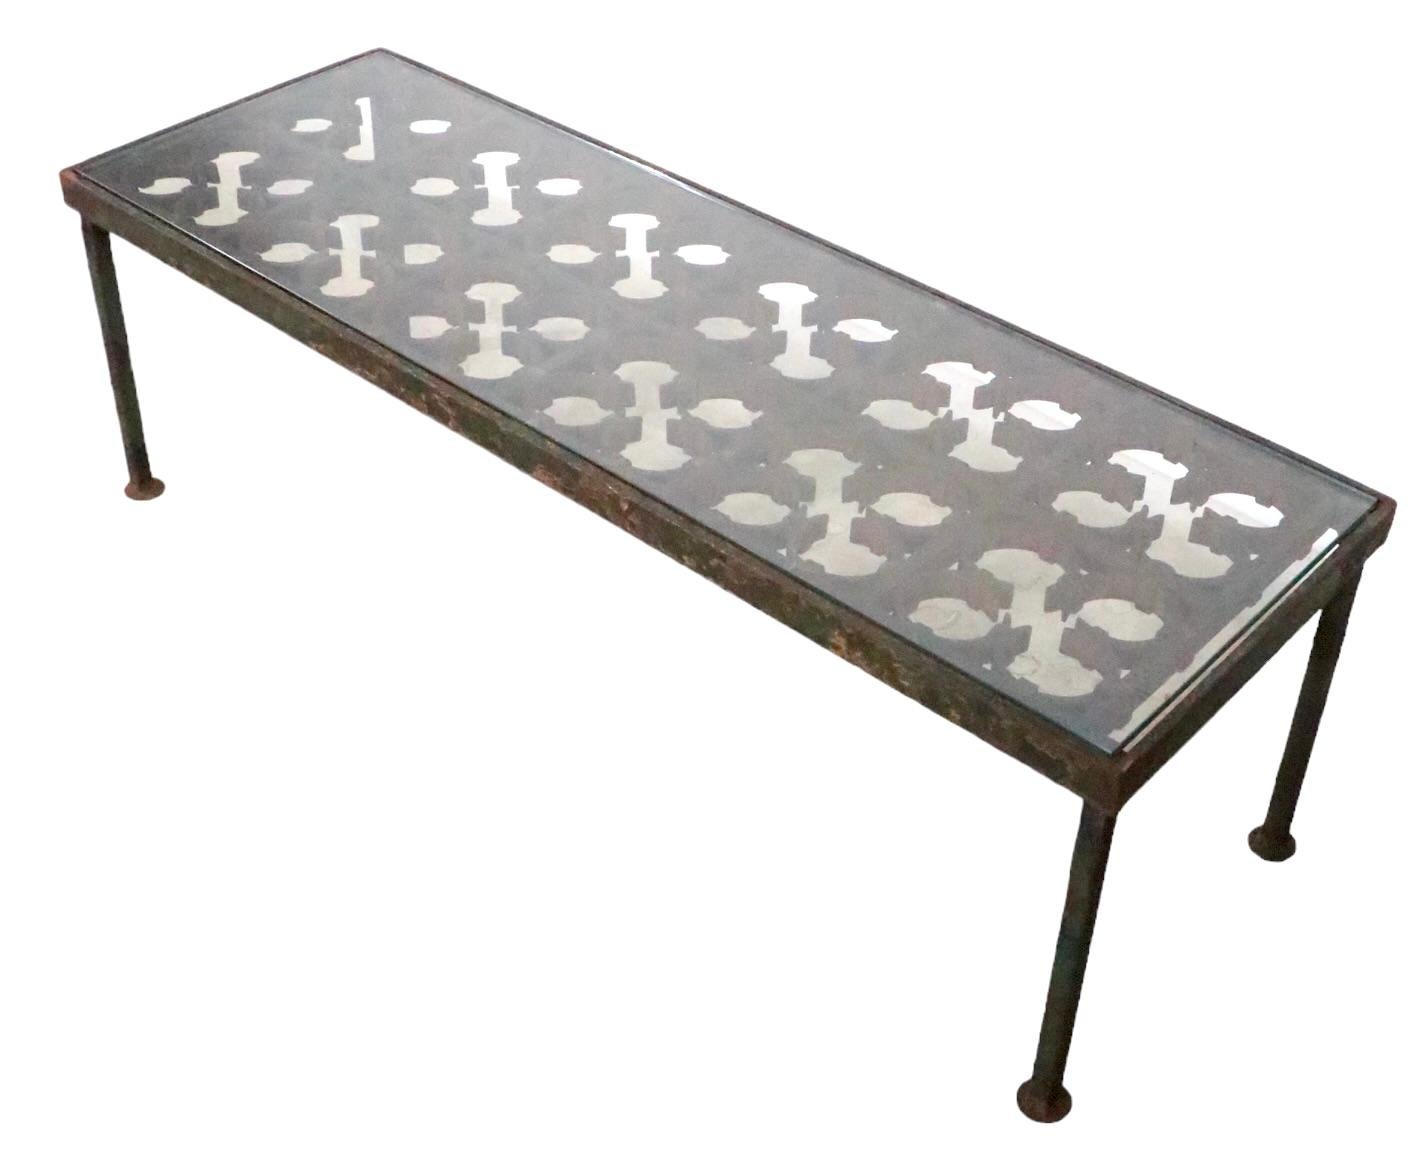 20th Century Iron and Glass Coffee Table created from a decorative  architectural iron panel